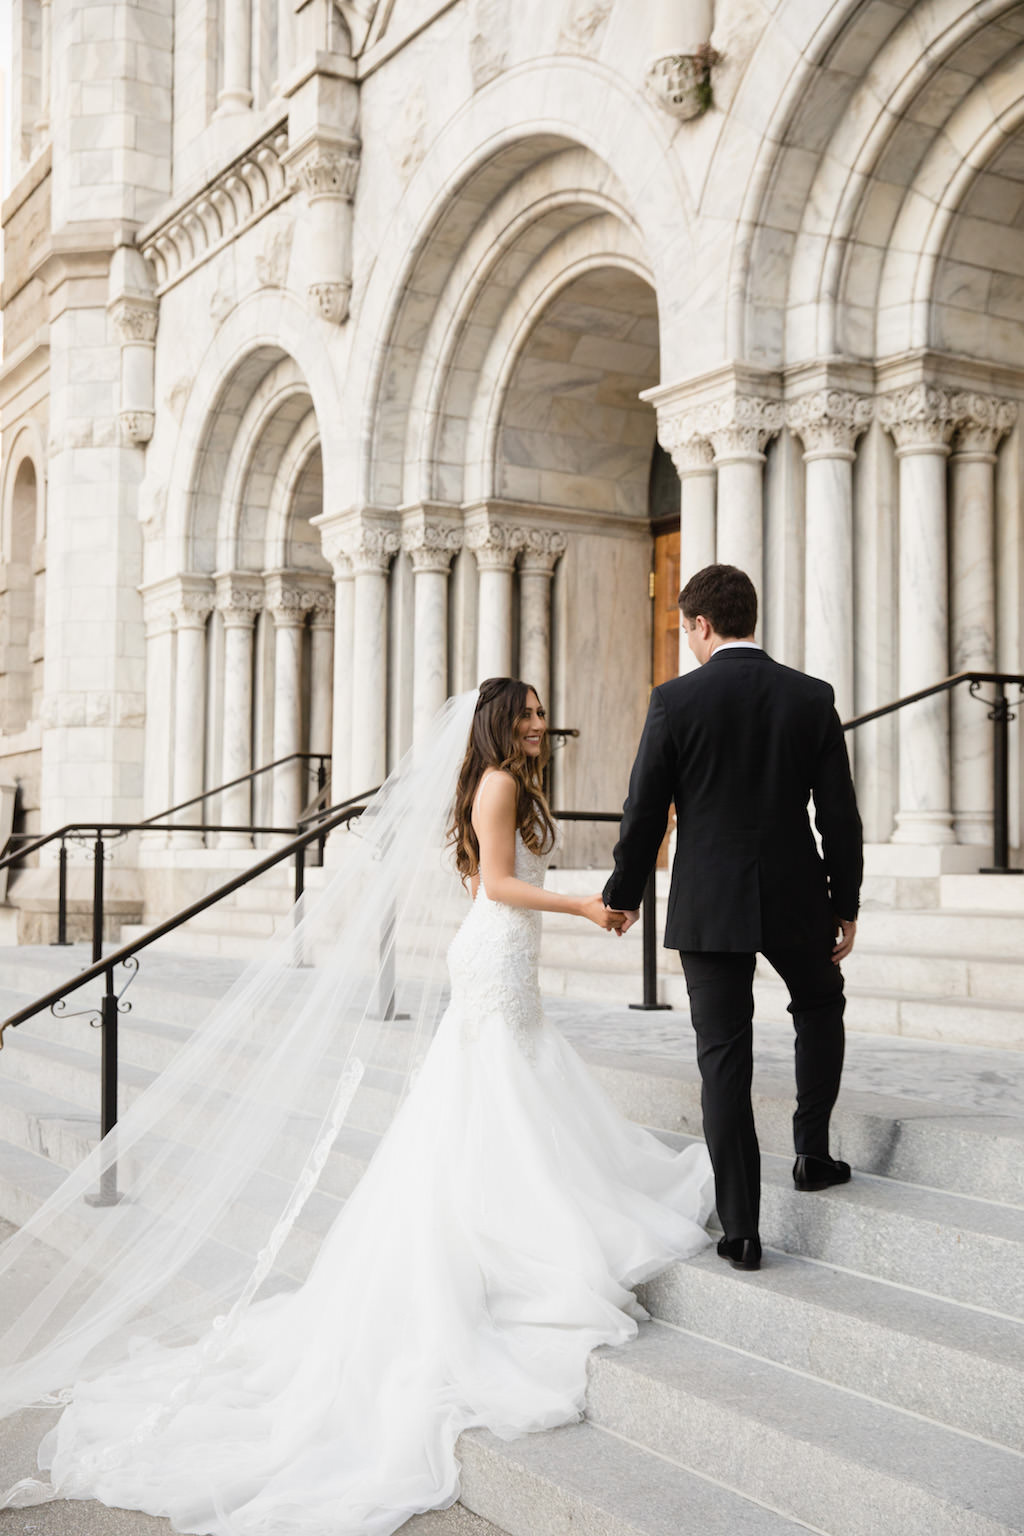 Outdoor Church Steps Wedding Portrait, Bride in Trumpet Martina Liana Dress with Long Veil | Downtown Tampa Ceremony Venue Sacred Heart Catholic Church